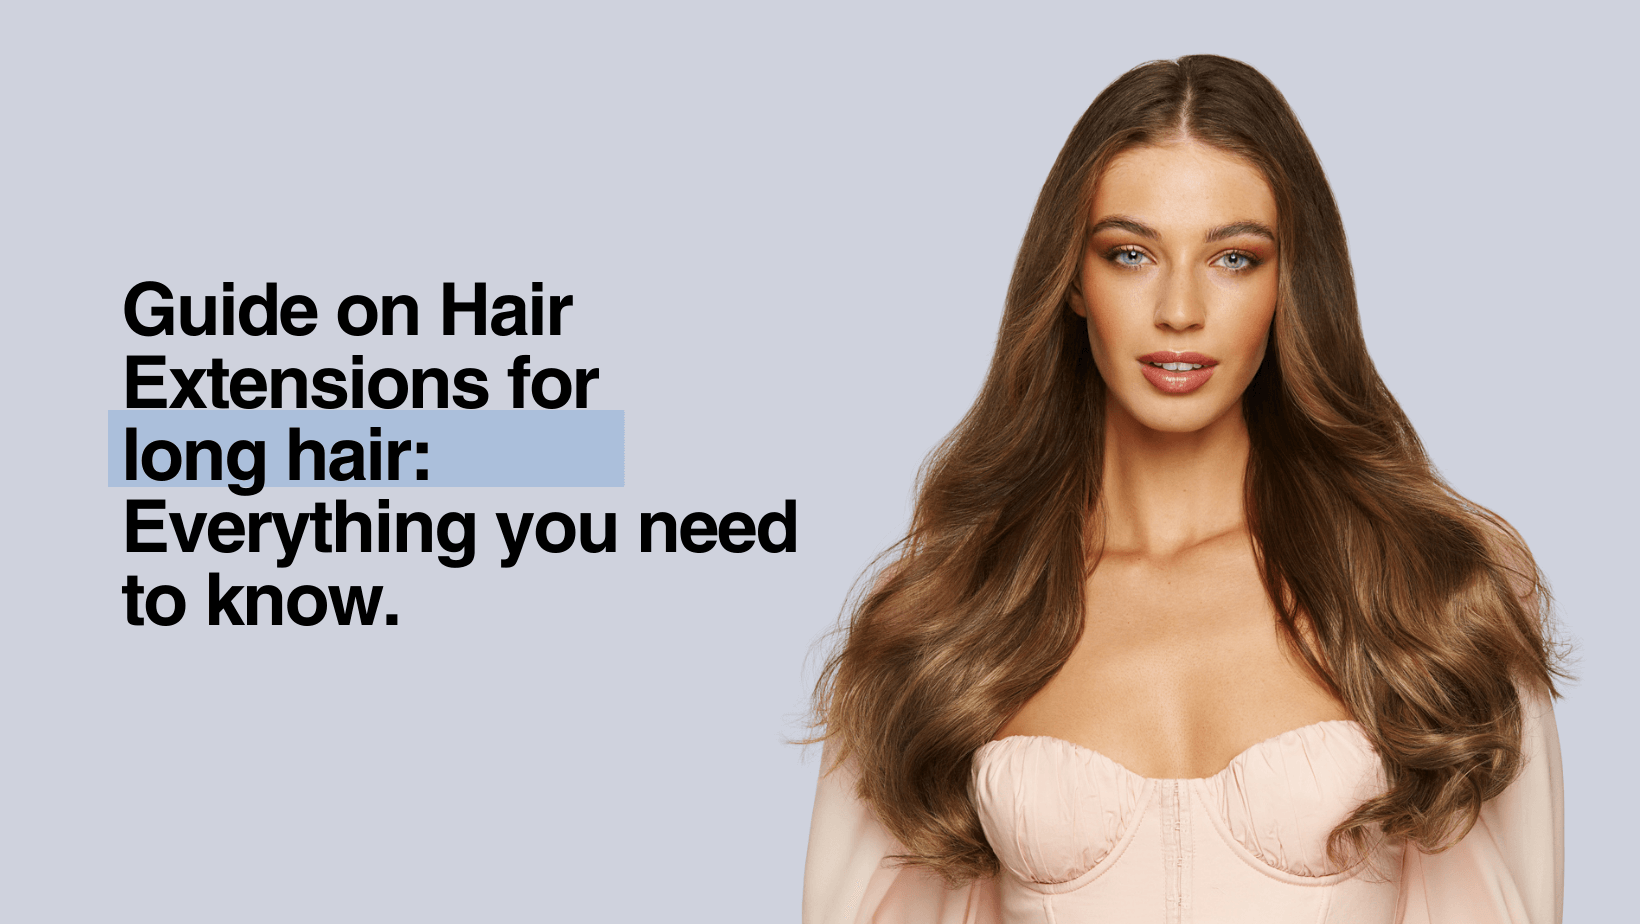 Guide on Hair Extensions For Long Hair: Everything You Need To Know